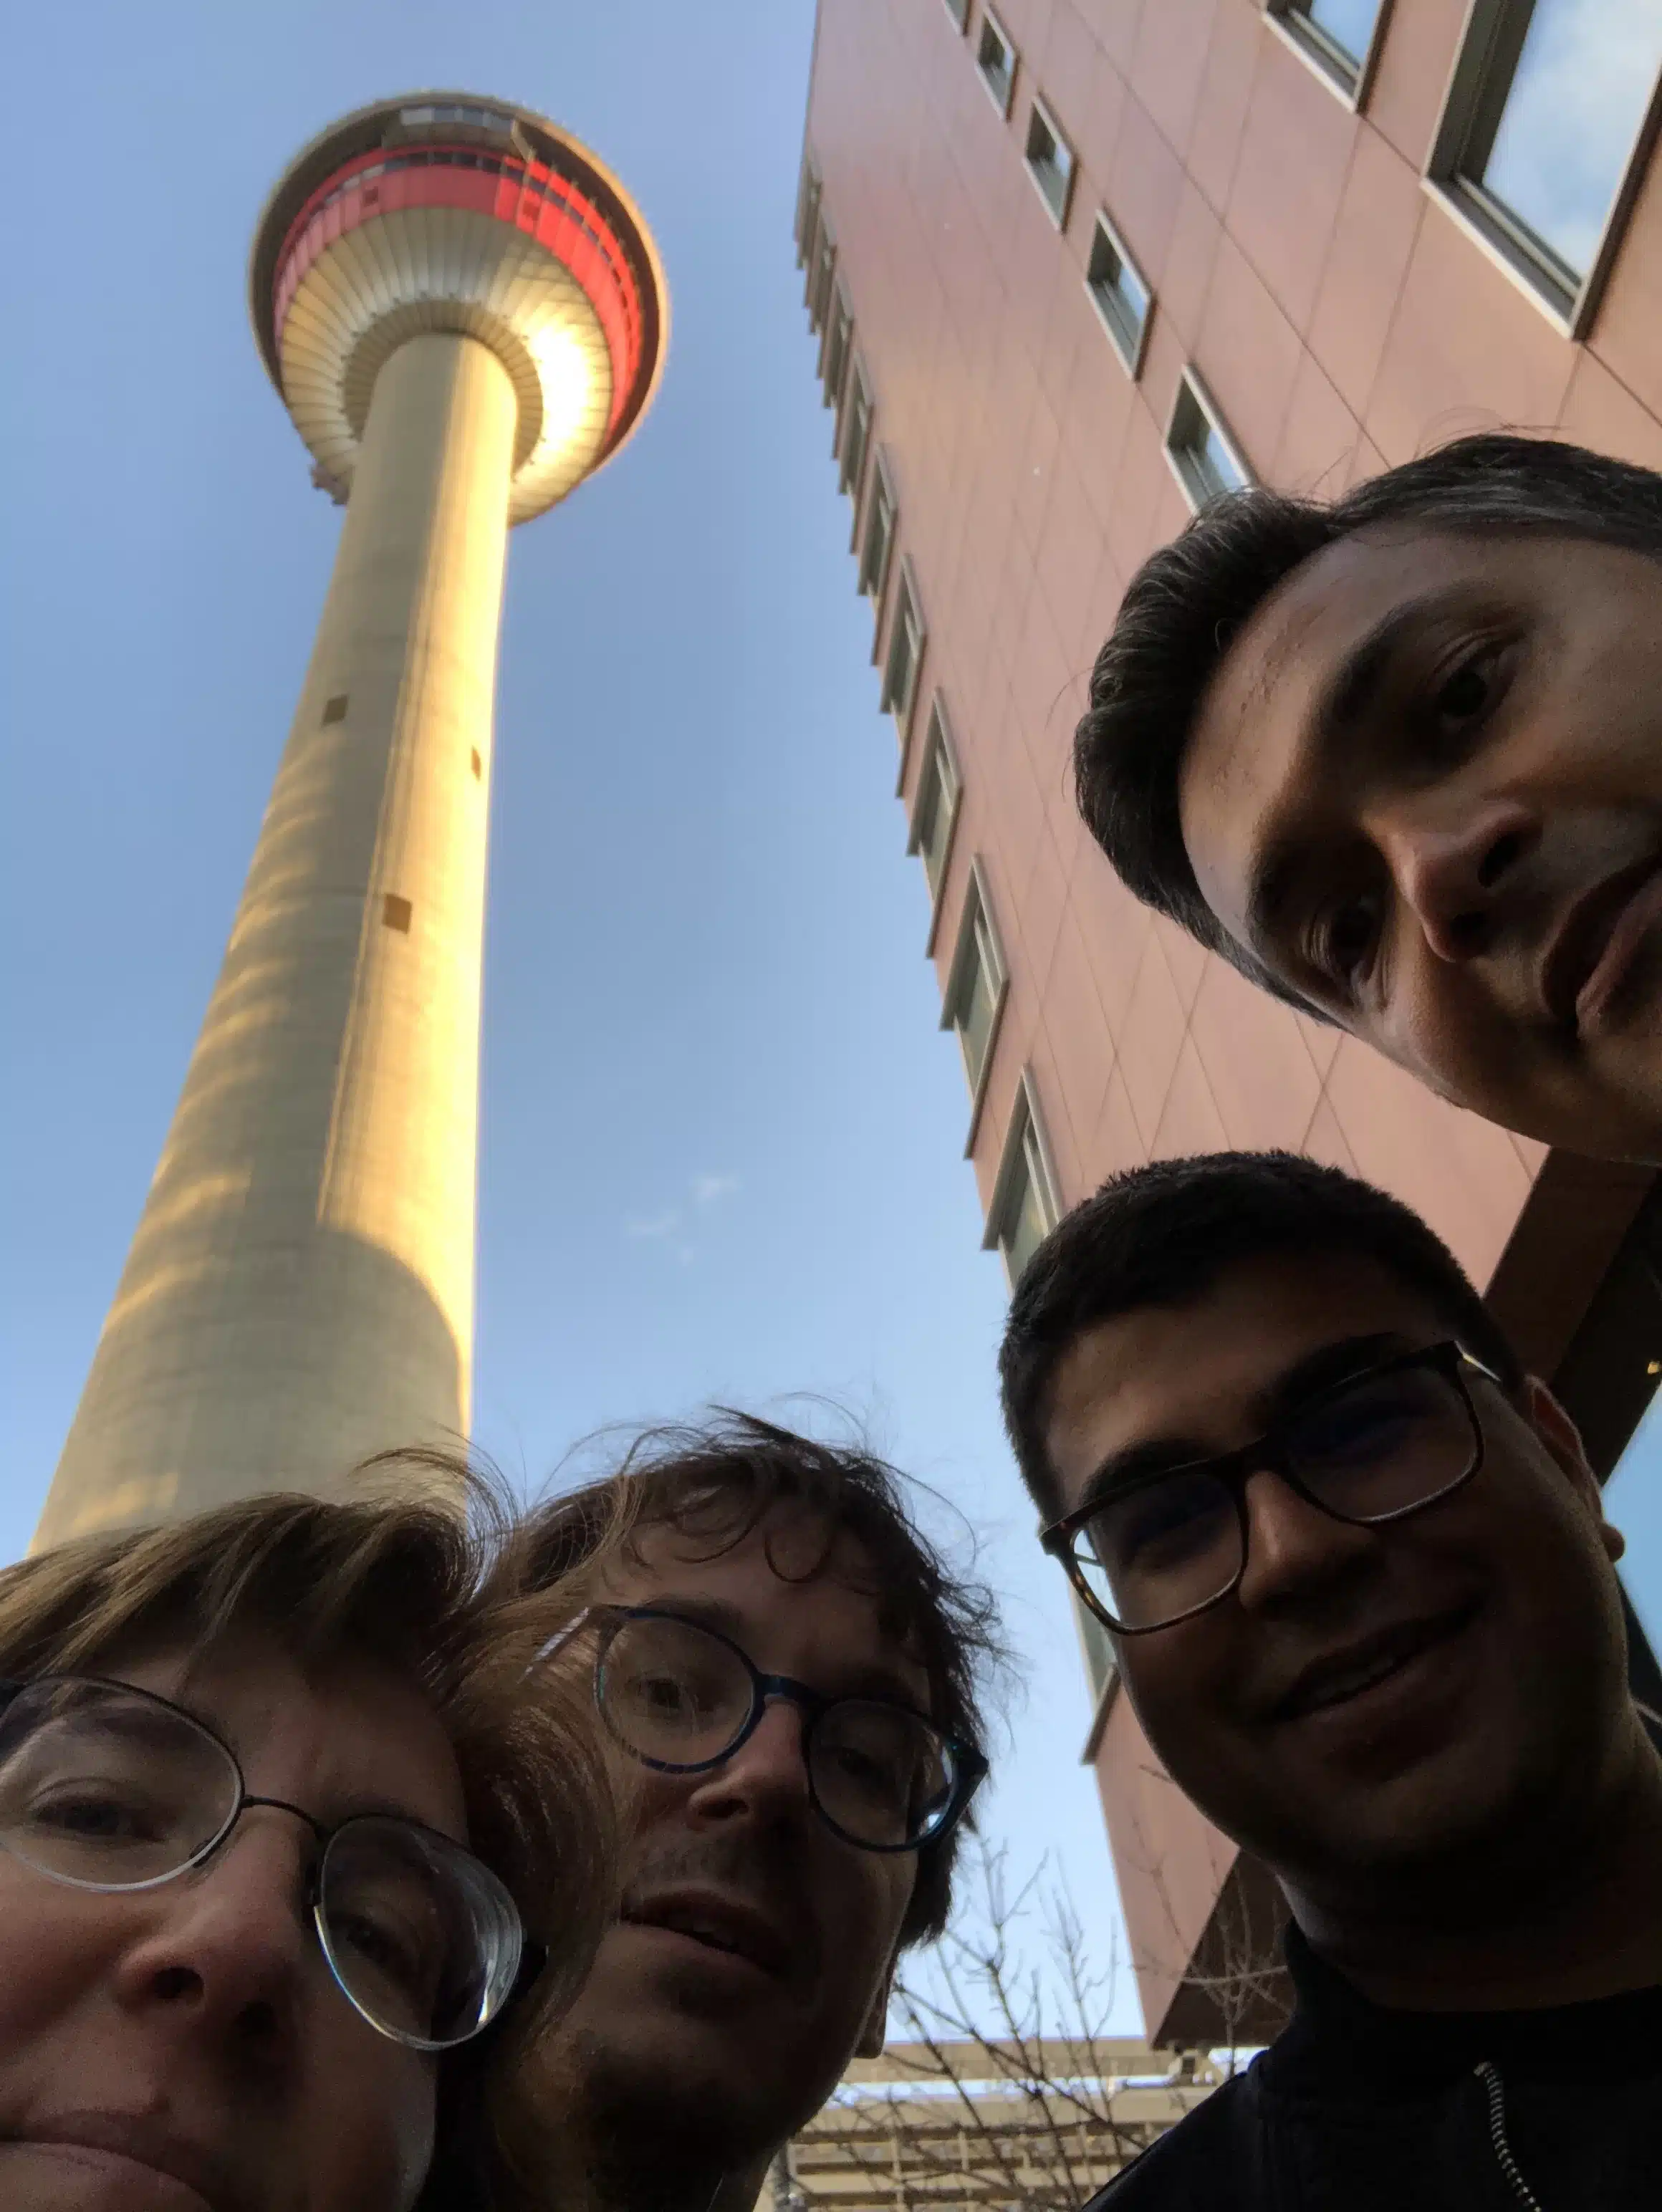 Scavenger hunt team leaning and looking down with Calgary Tower in the background